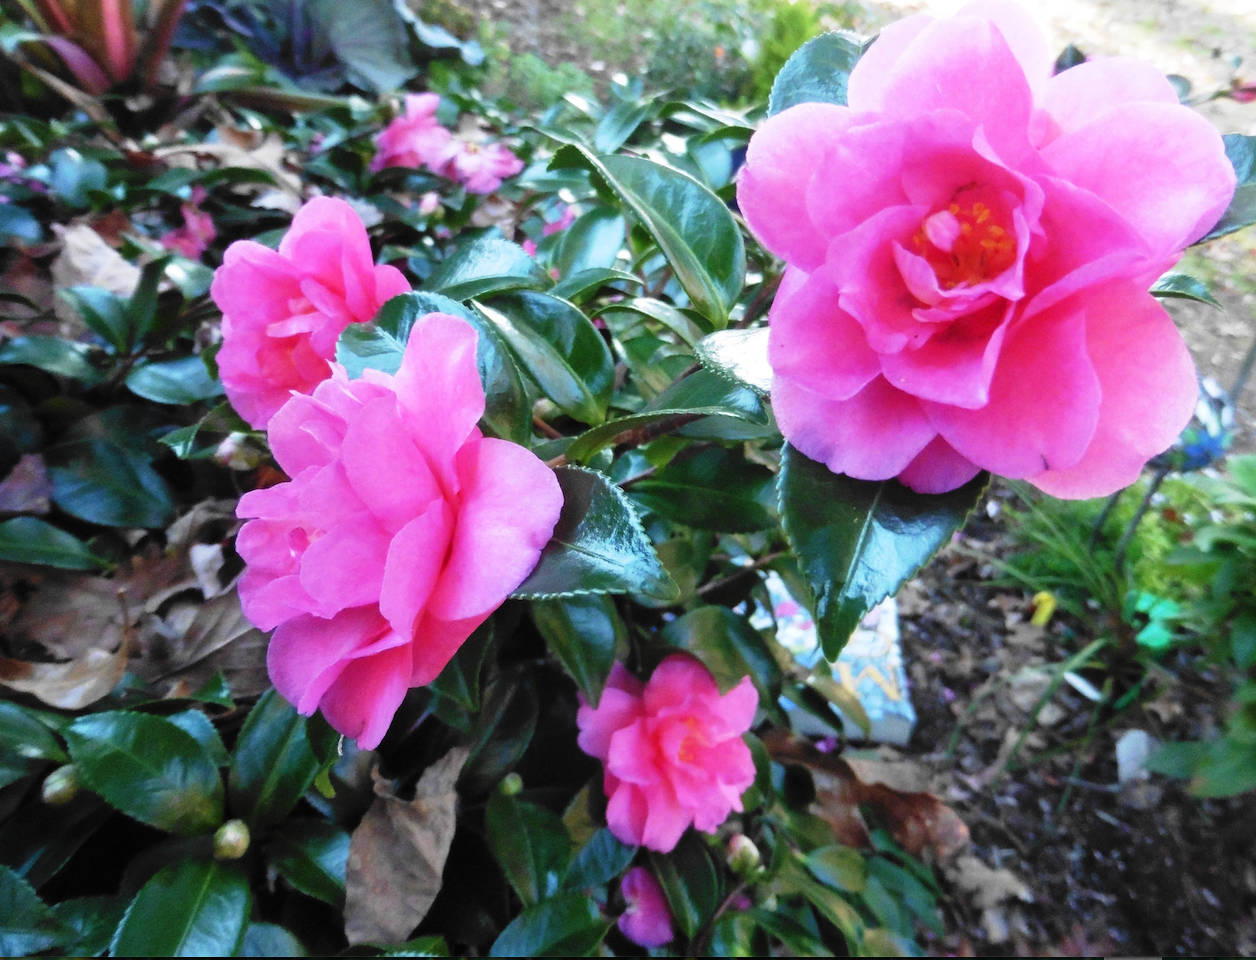 Can-do camelias: When everything else is gray, camellias bloom in the gloom